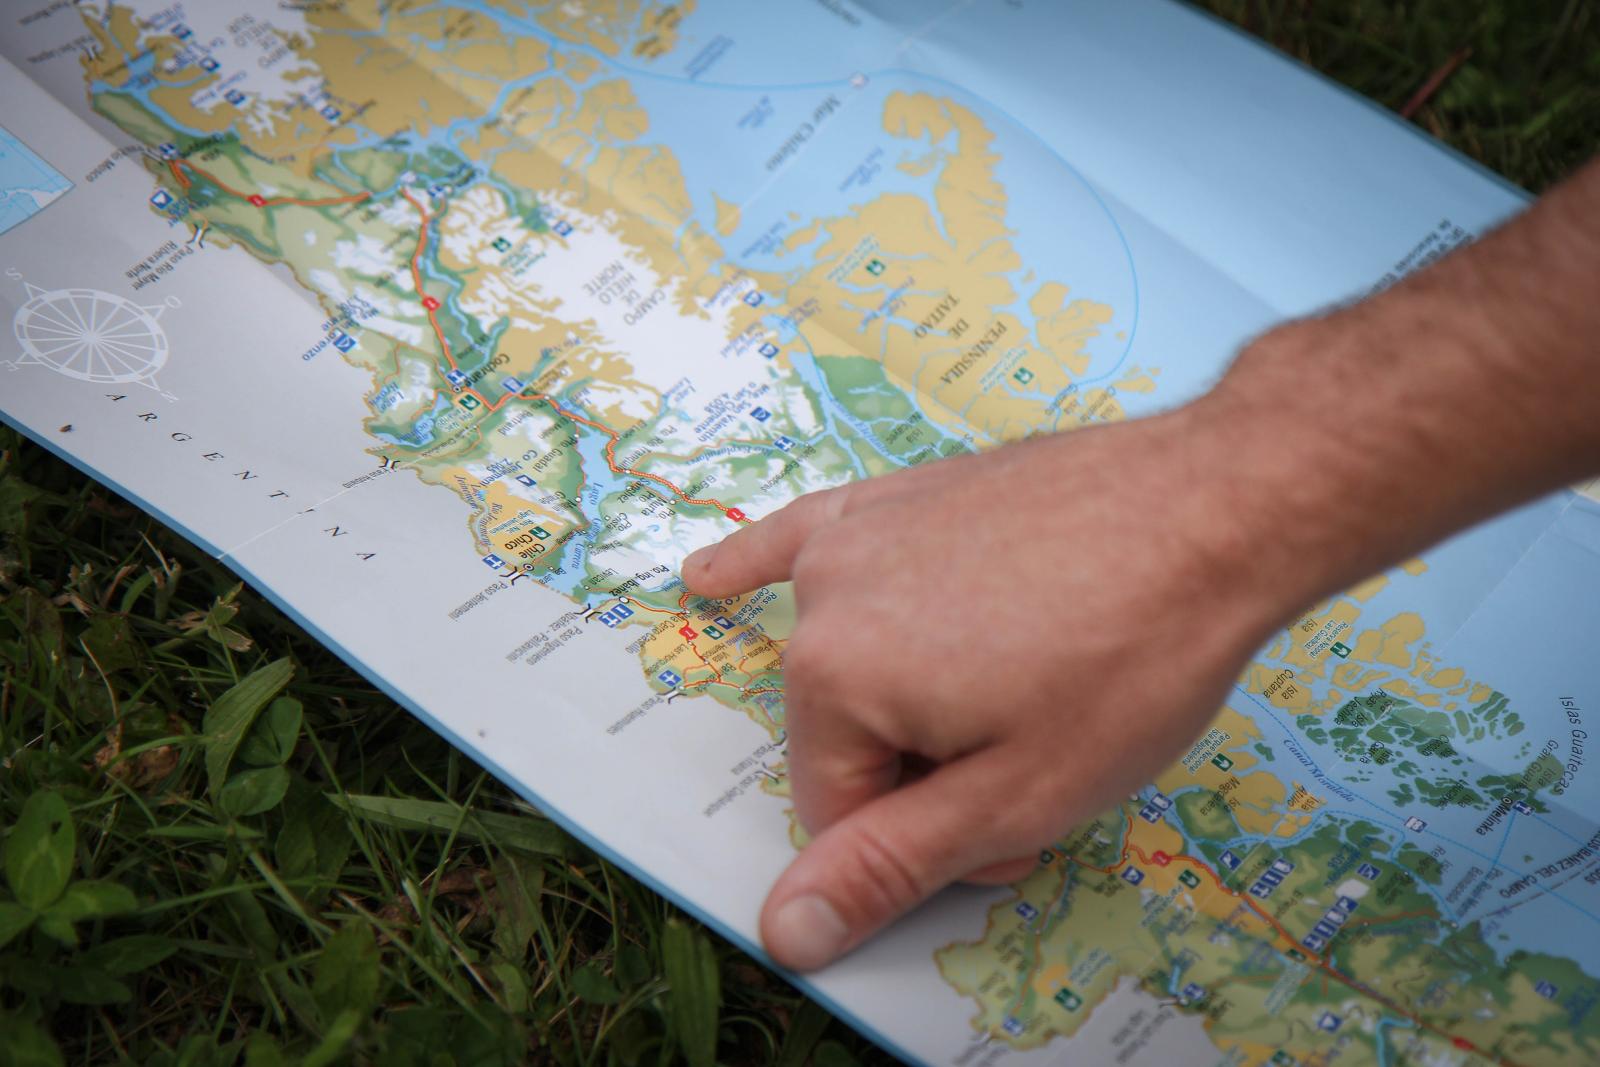 hand pointing to a destination on a map laid on the ground